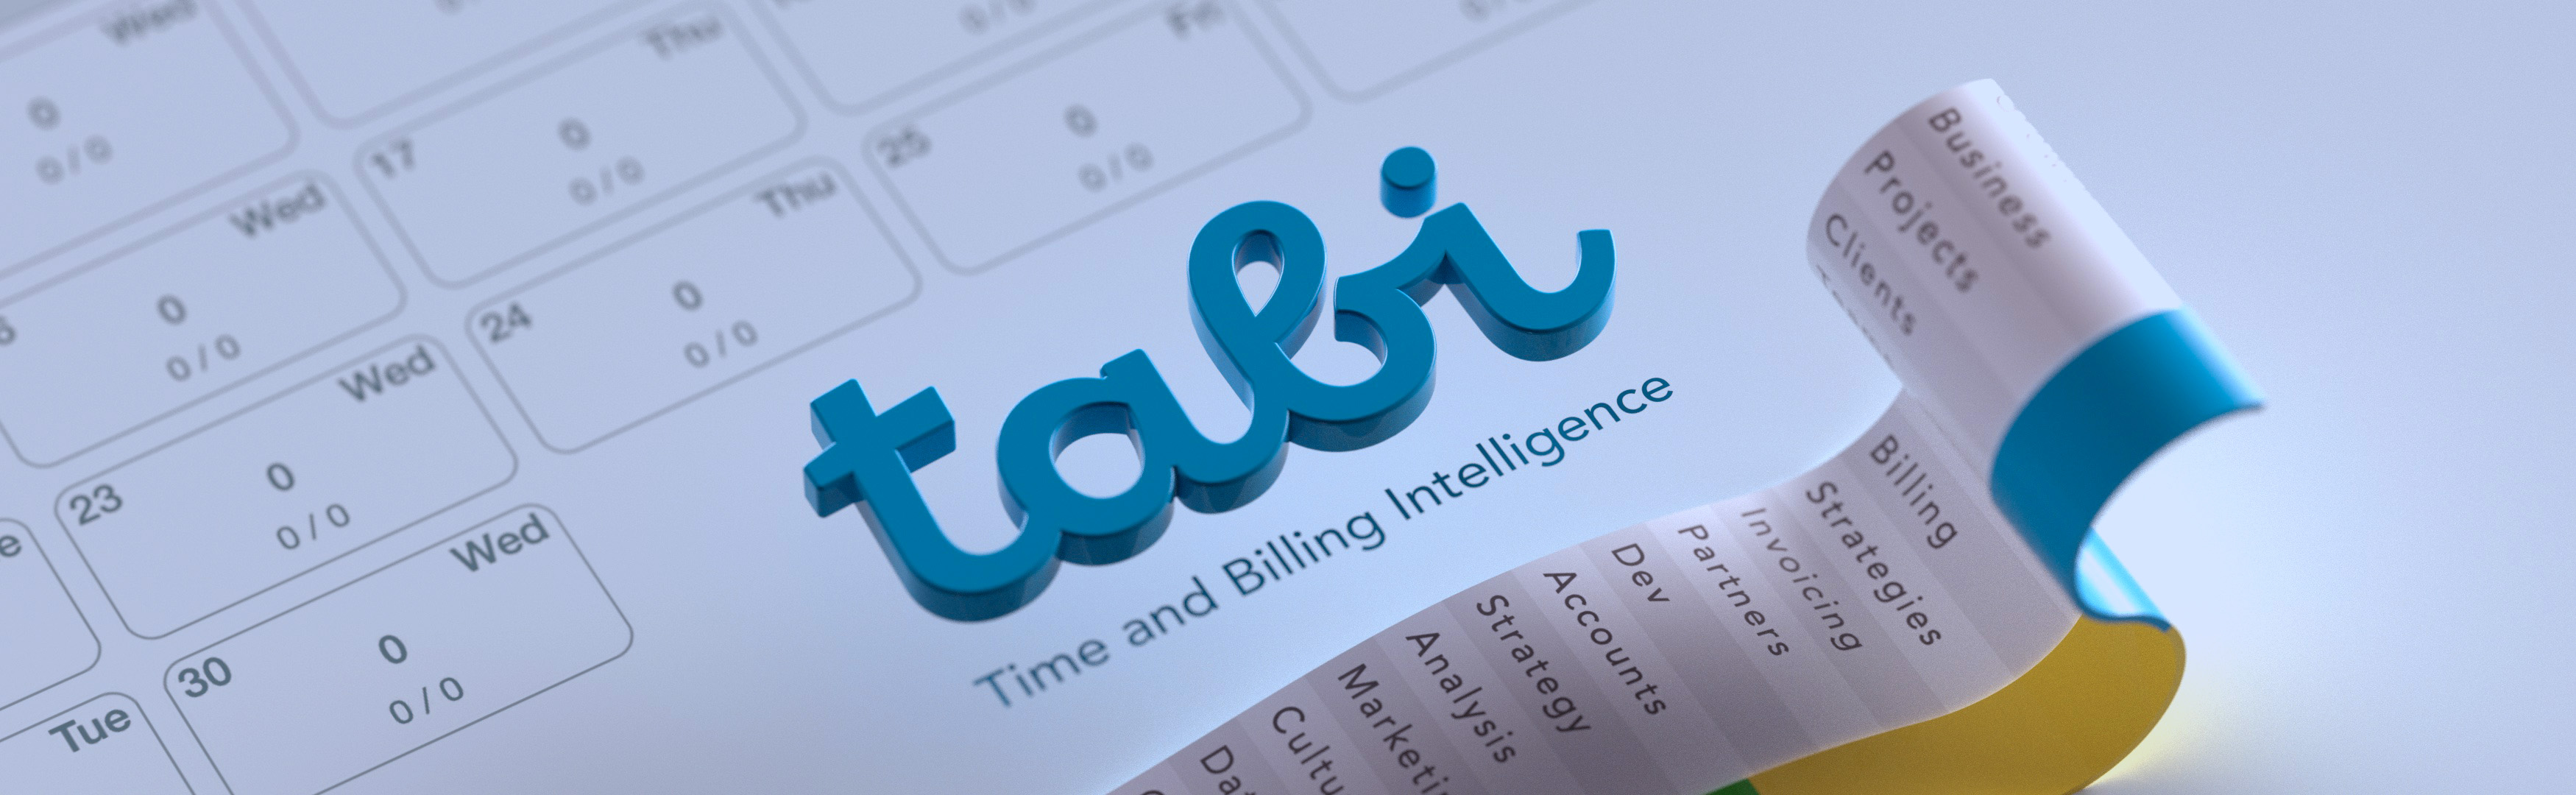 Decorative banner displaying the tabi logo with the subheader 'Time and billing intelligence'